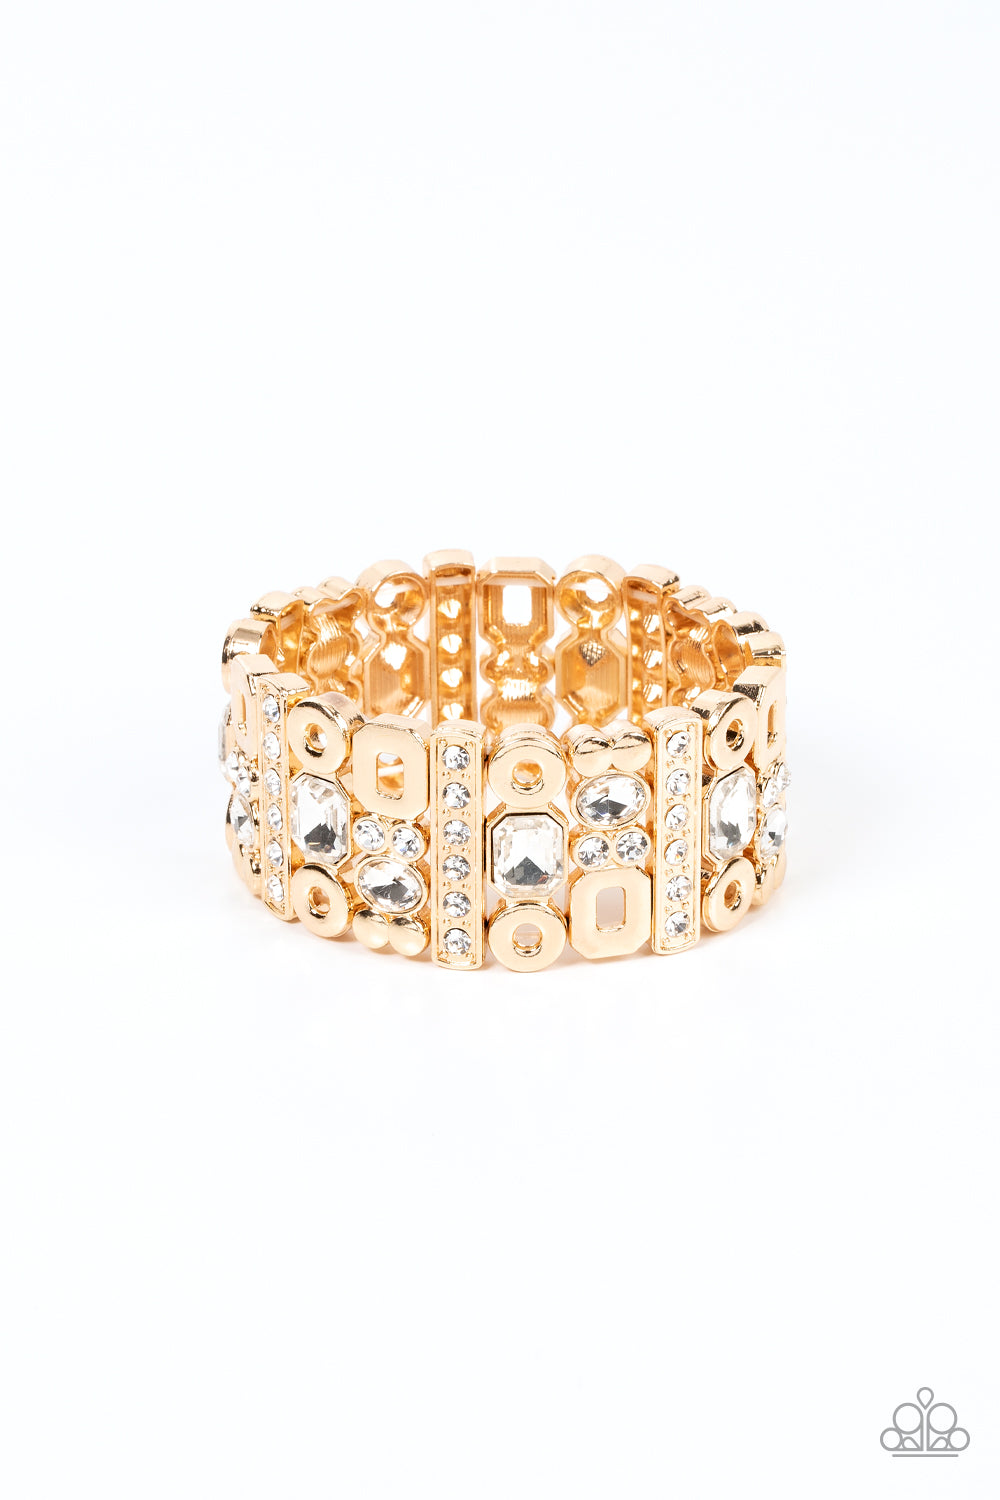 Dynamically Diverse Gold Bracelet - Paparazzi Accessories  Infused with flat gold studs and geometric gold accents, a mismatched assortment of oval, round, and emerald style white rhinestones coalesce into edgy frames along a stretchy band for an intense sparkle around the wrist.  Sold as one individual bracelet.